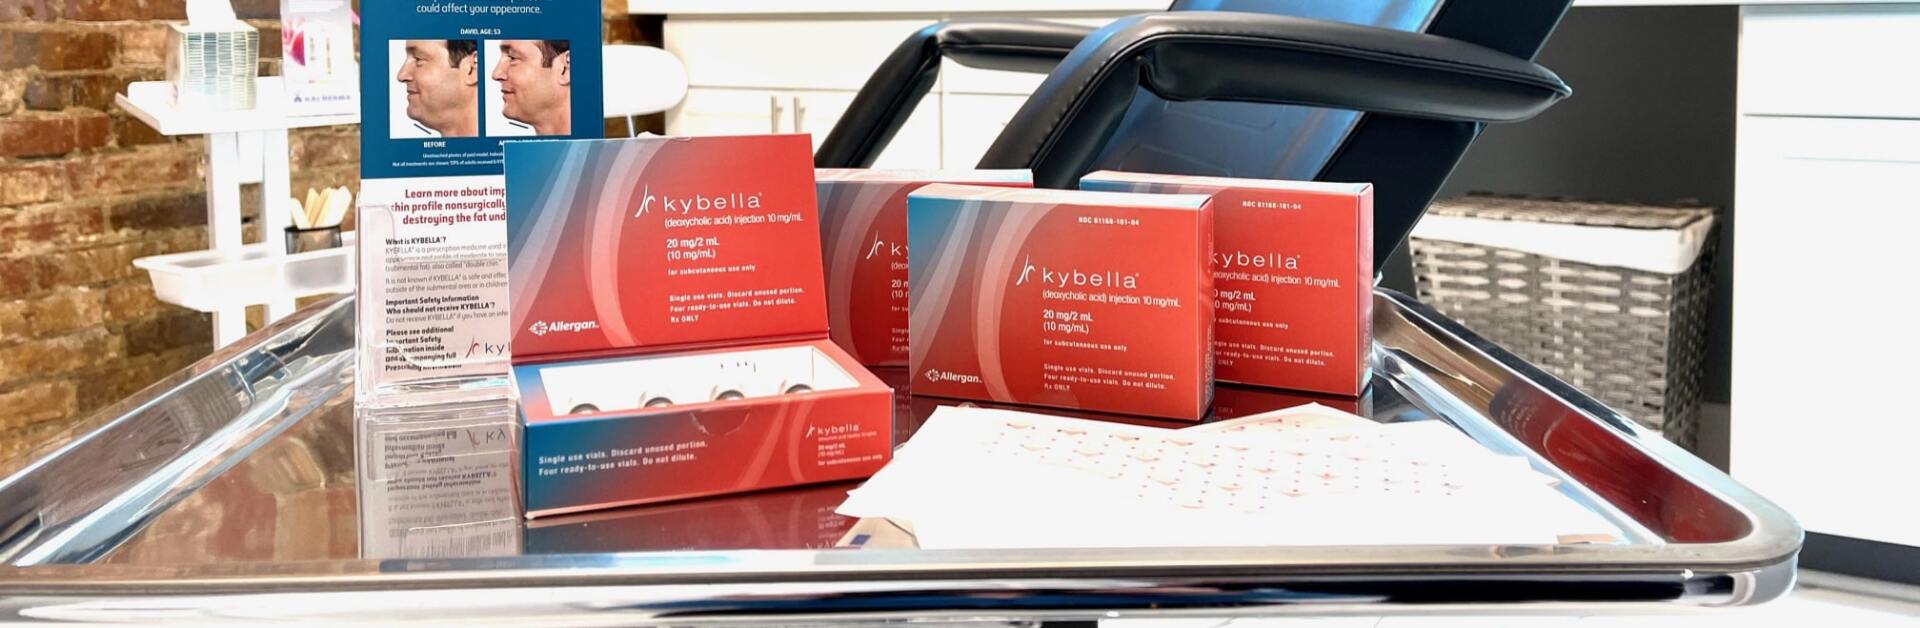 Several boxes of Kybella at Lush Aesthetics Med Spa located in Georgetown, KY